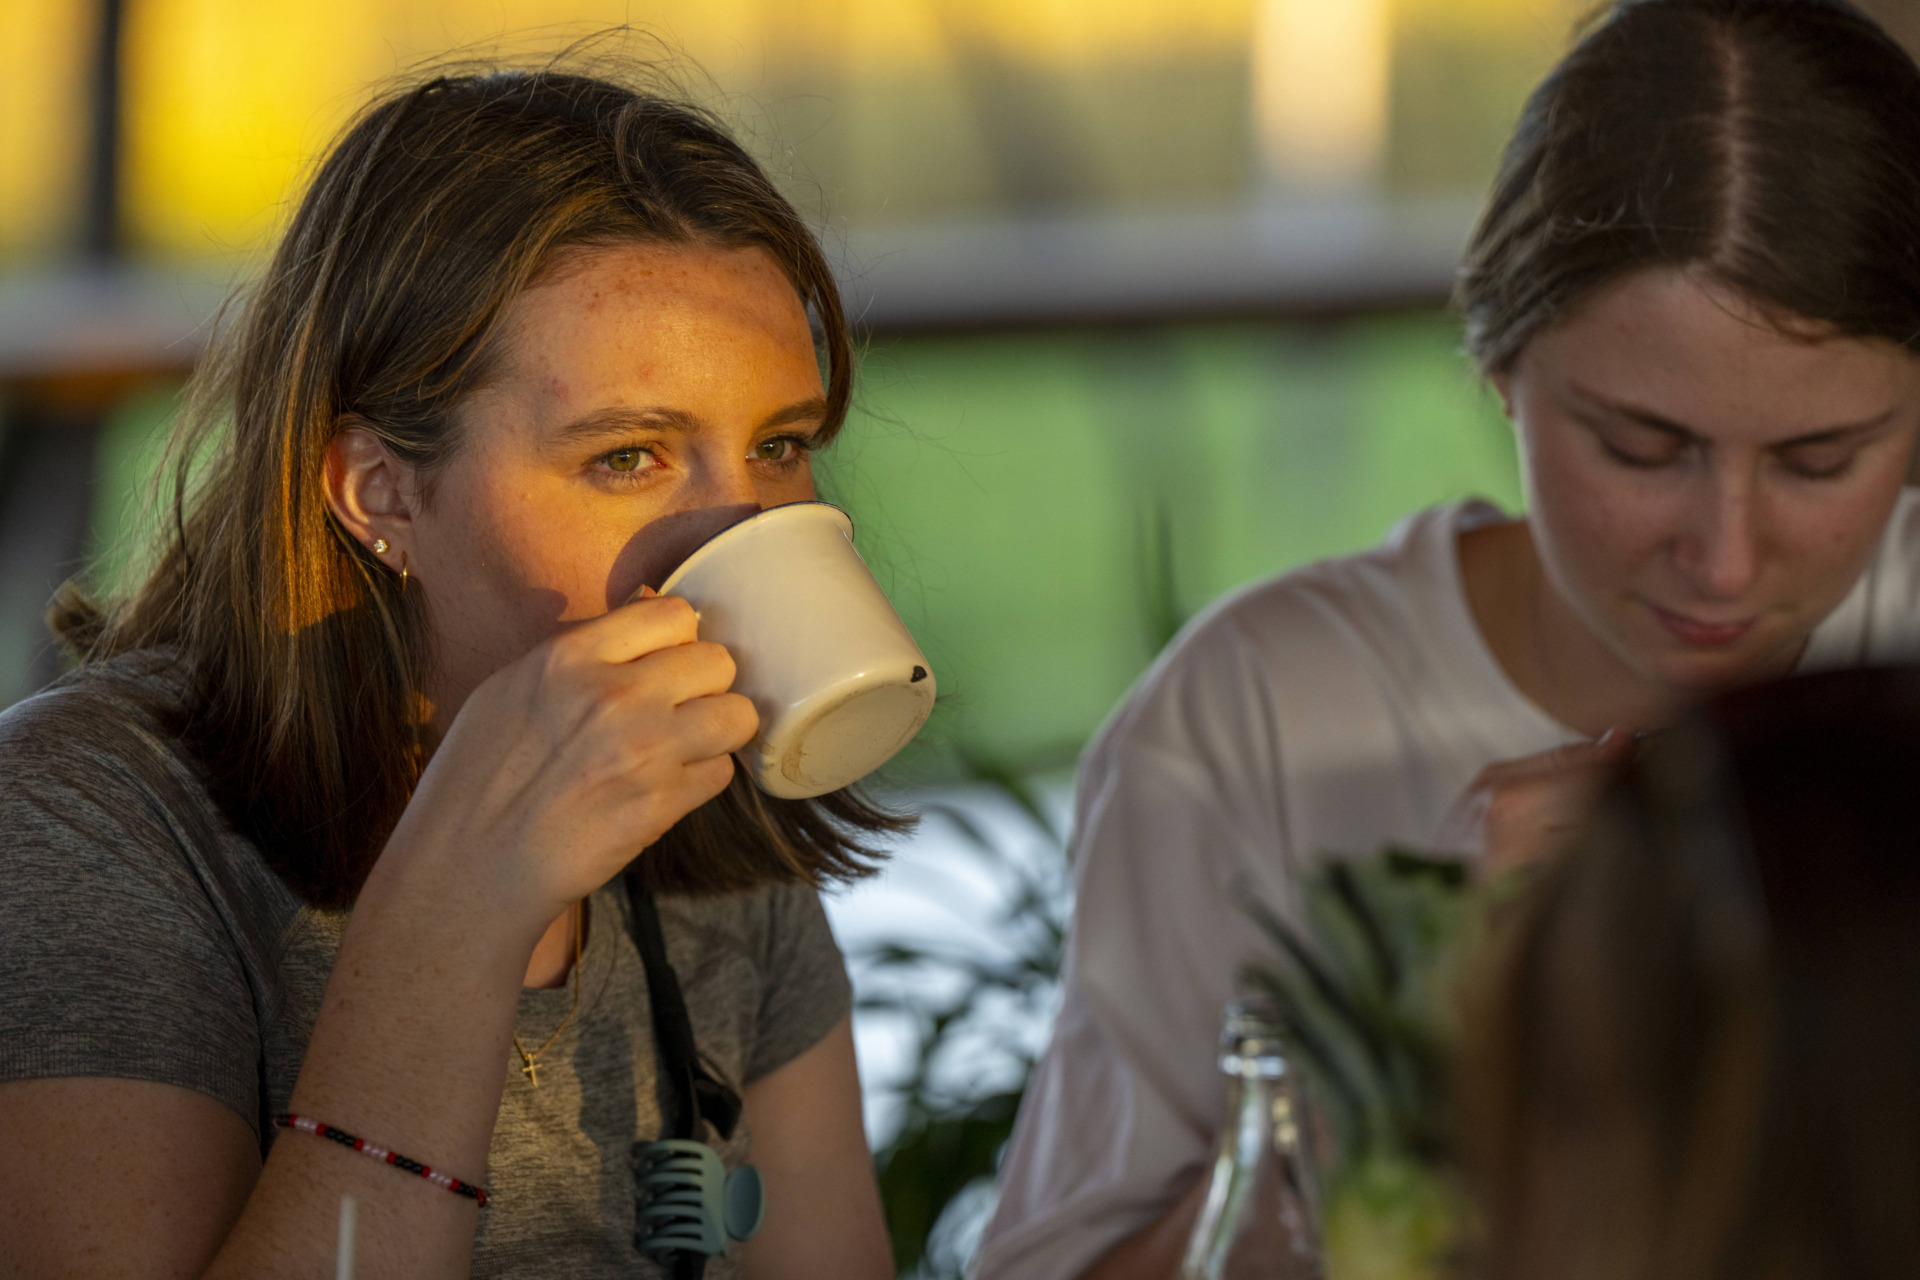 Two students drinking coffee